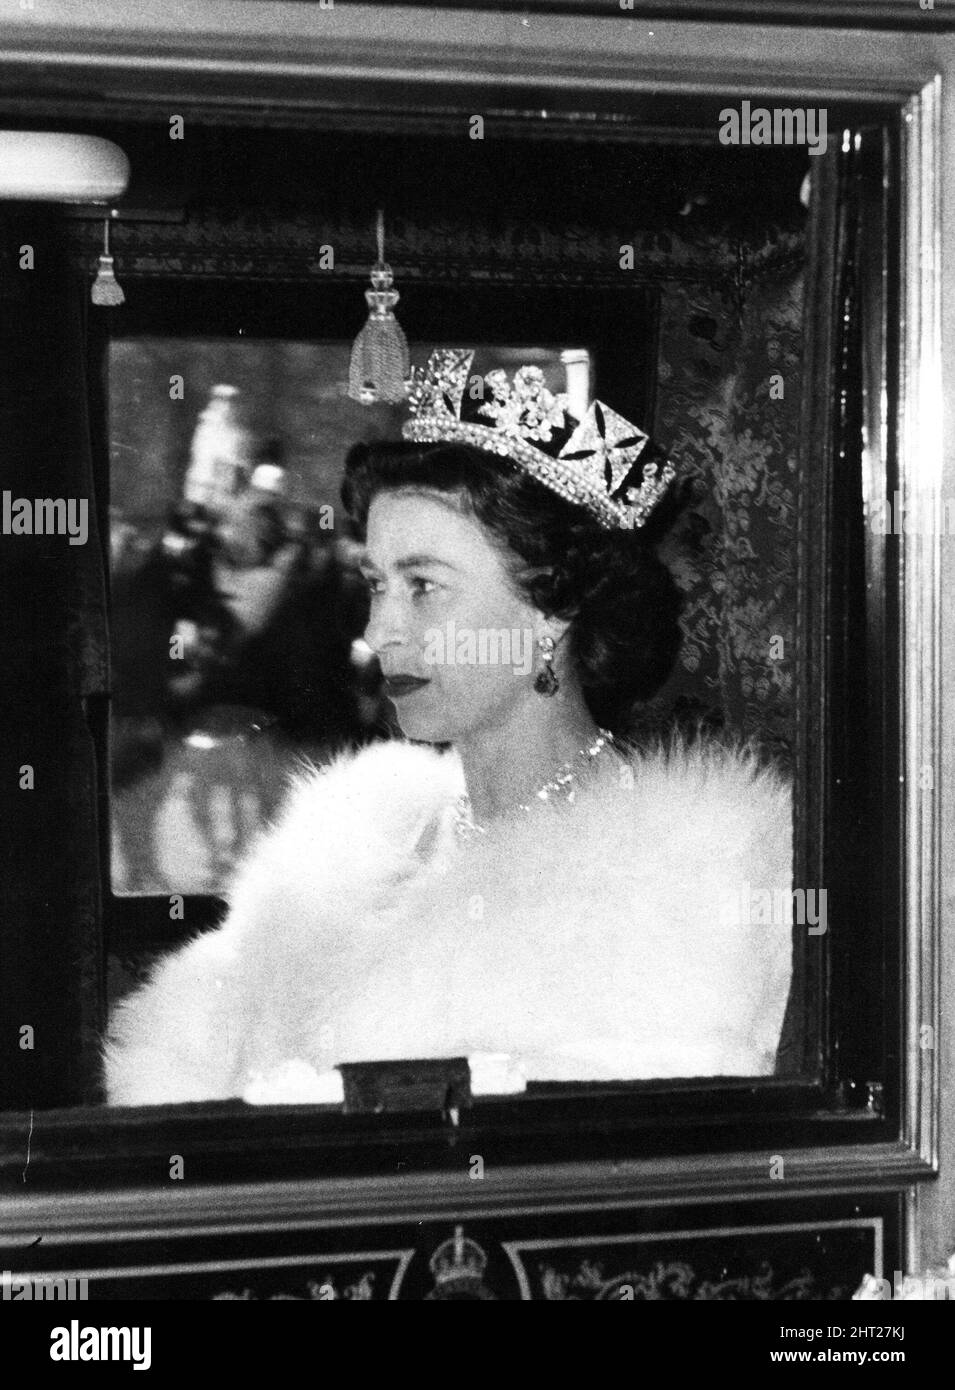 Queen Elizabeth II wears the Imperial State Crown at the State Opening Of  Parliament in London on November 15, 2006. Anwar Hussein/EMPICS  Entertainment Stock Photo - Alamy